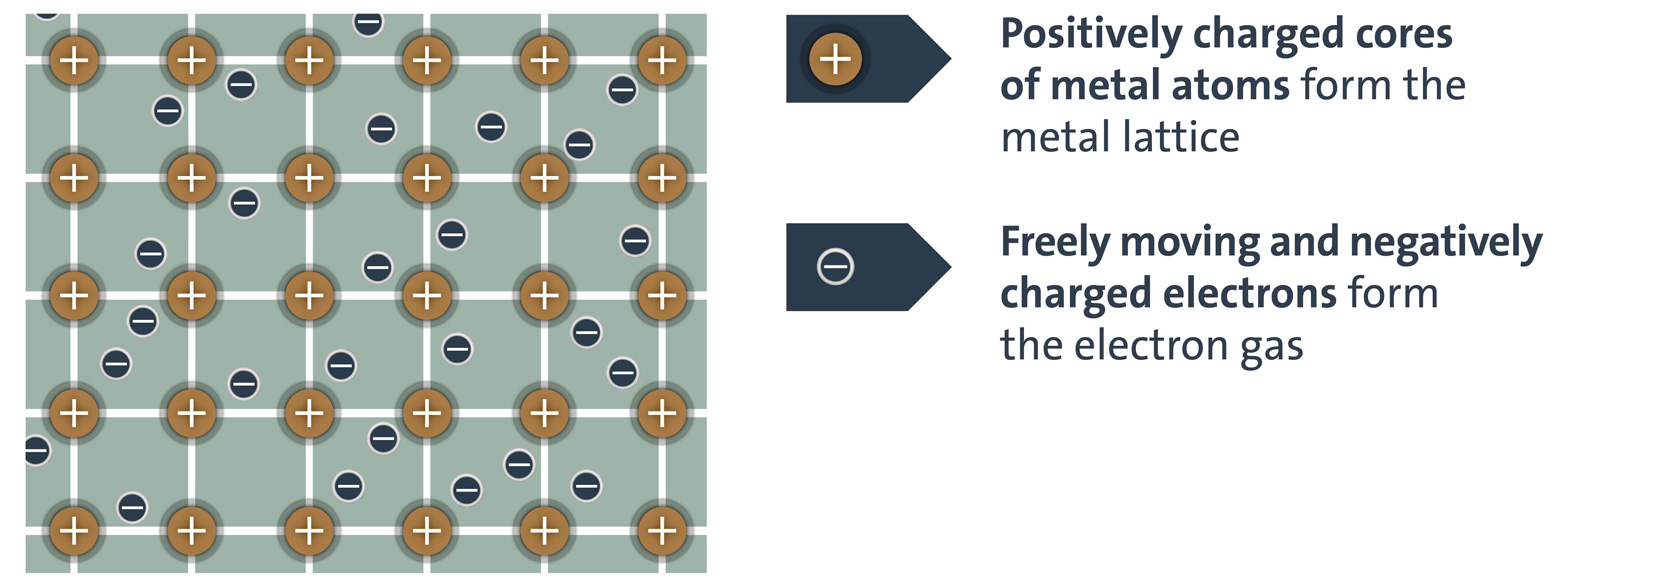 Positively charged cores of metal atoms form the metal lattice and Freely moving and negatively charged electrons form the electron gas